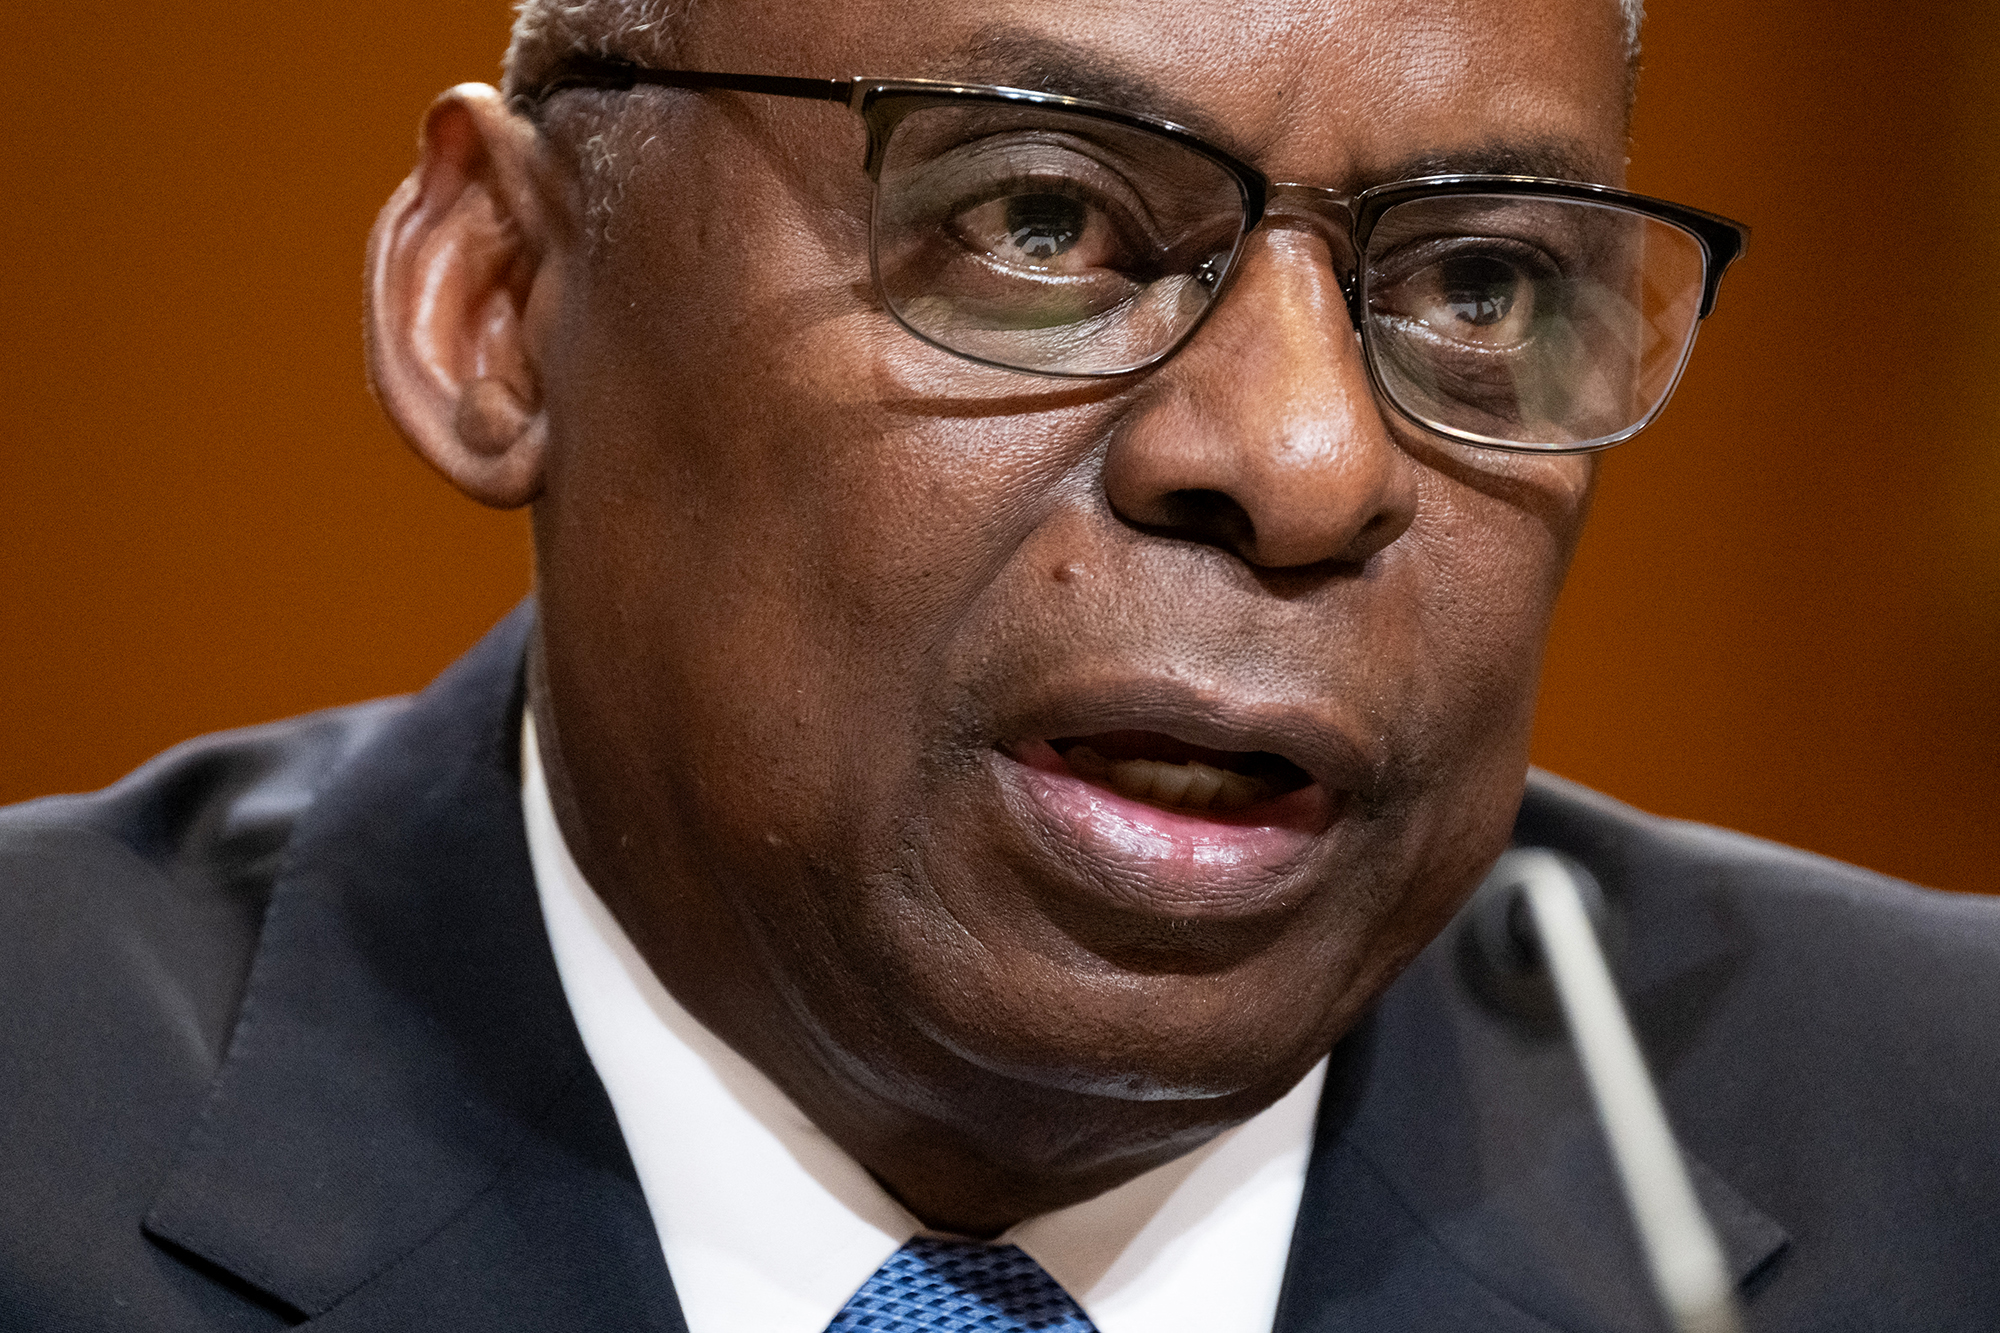 US Defense Secretary Lloyd Austin testifies at a Senate Appropriations Committee Defense Subcommittee hearing on Capitol Hill in Washington, D.C, on May 8.